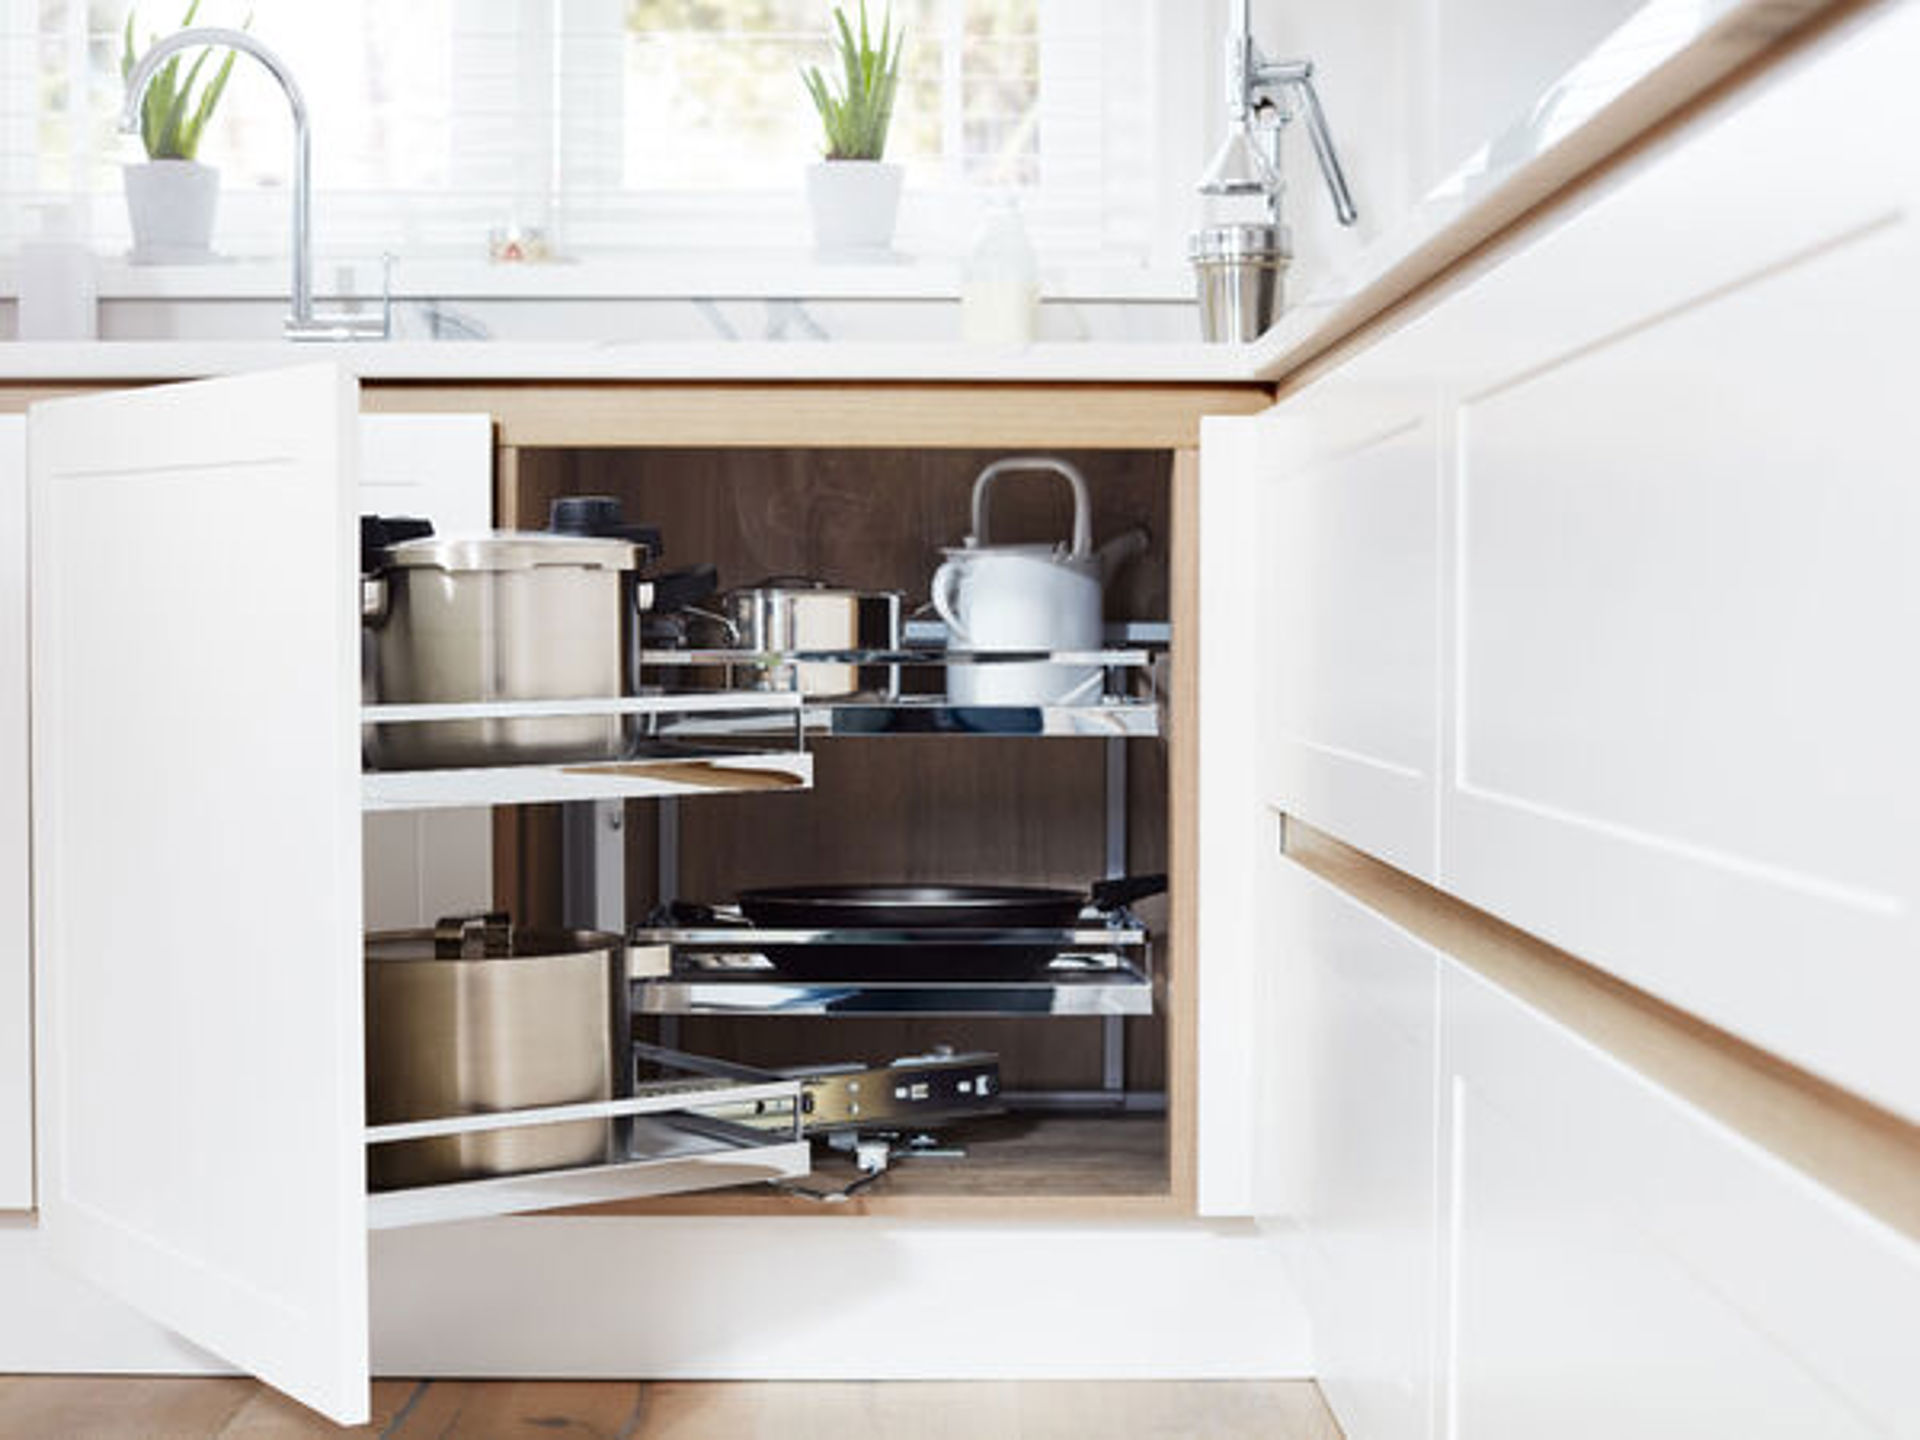 Two Space-Saving Solutions for the Compact Kitchen - Azure